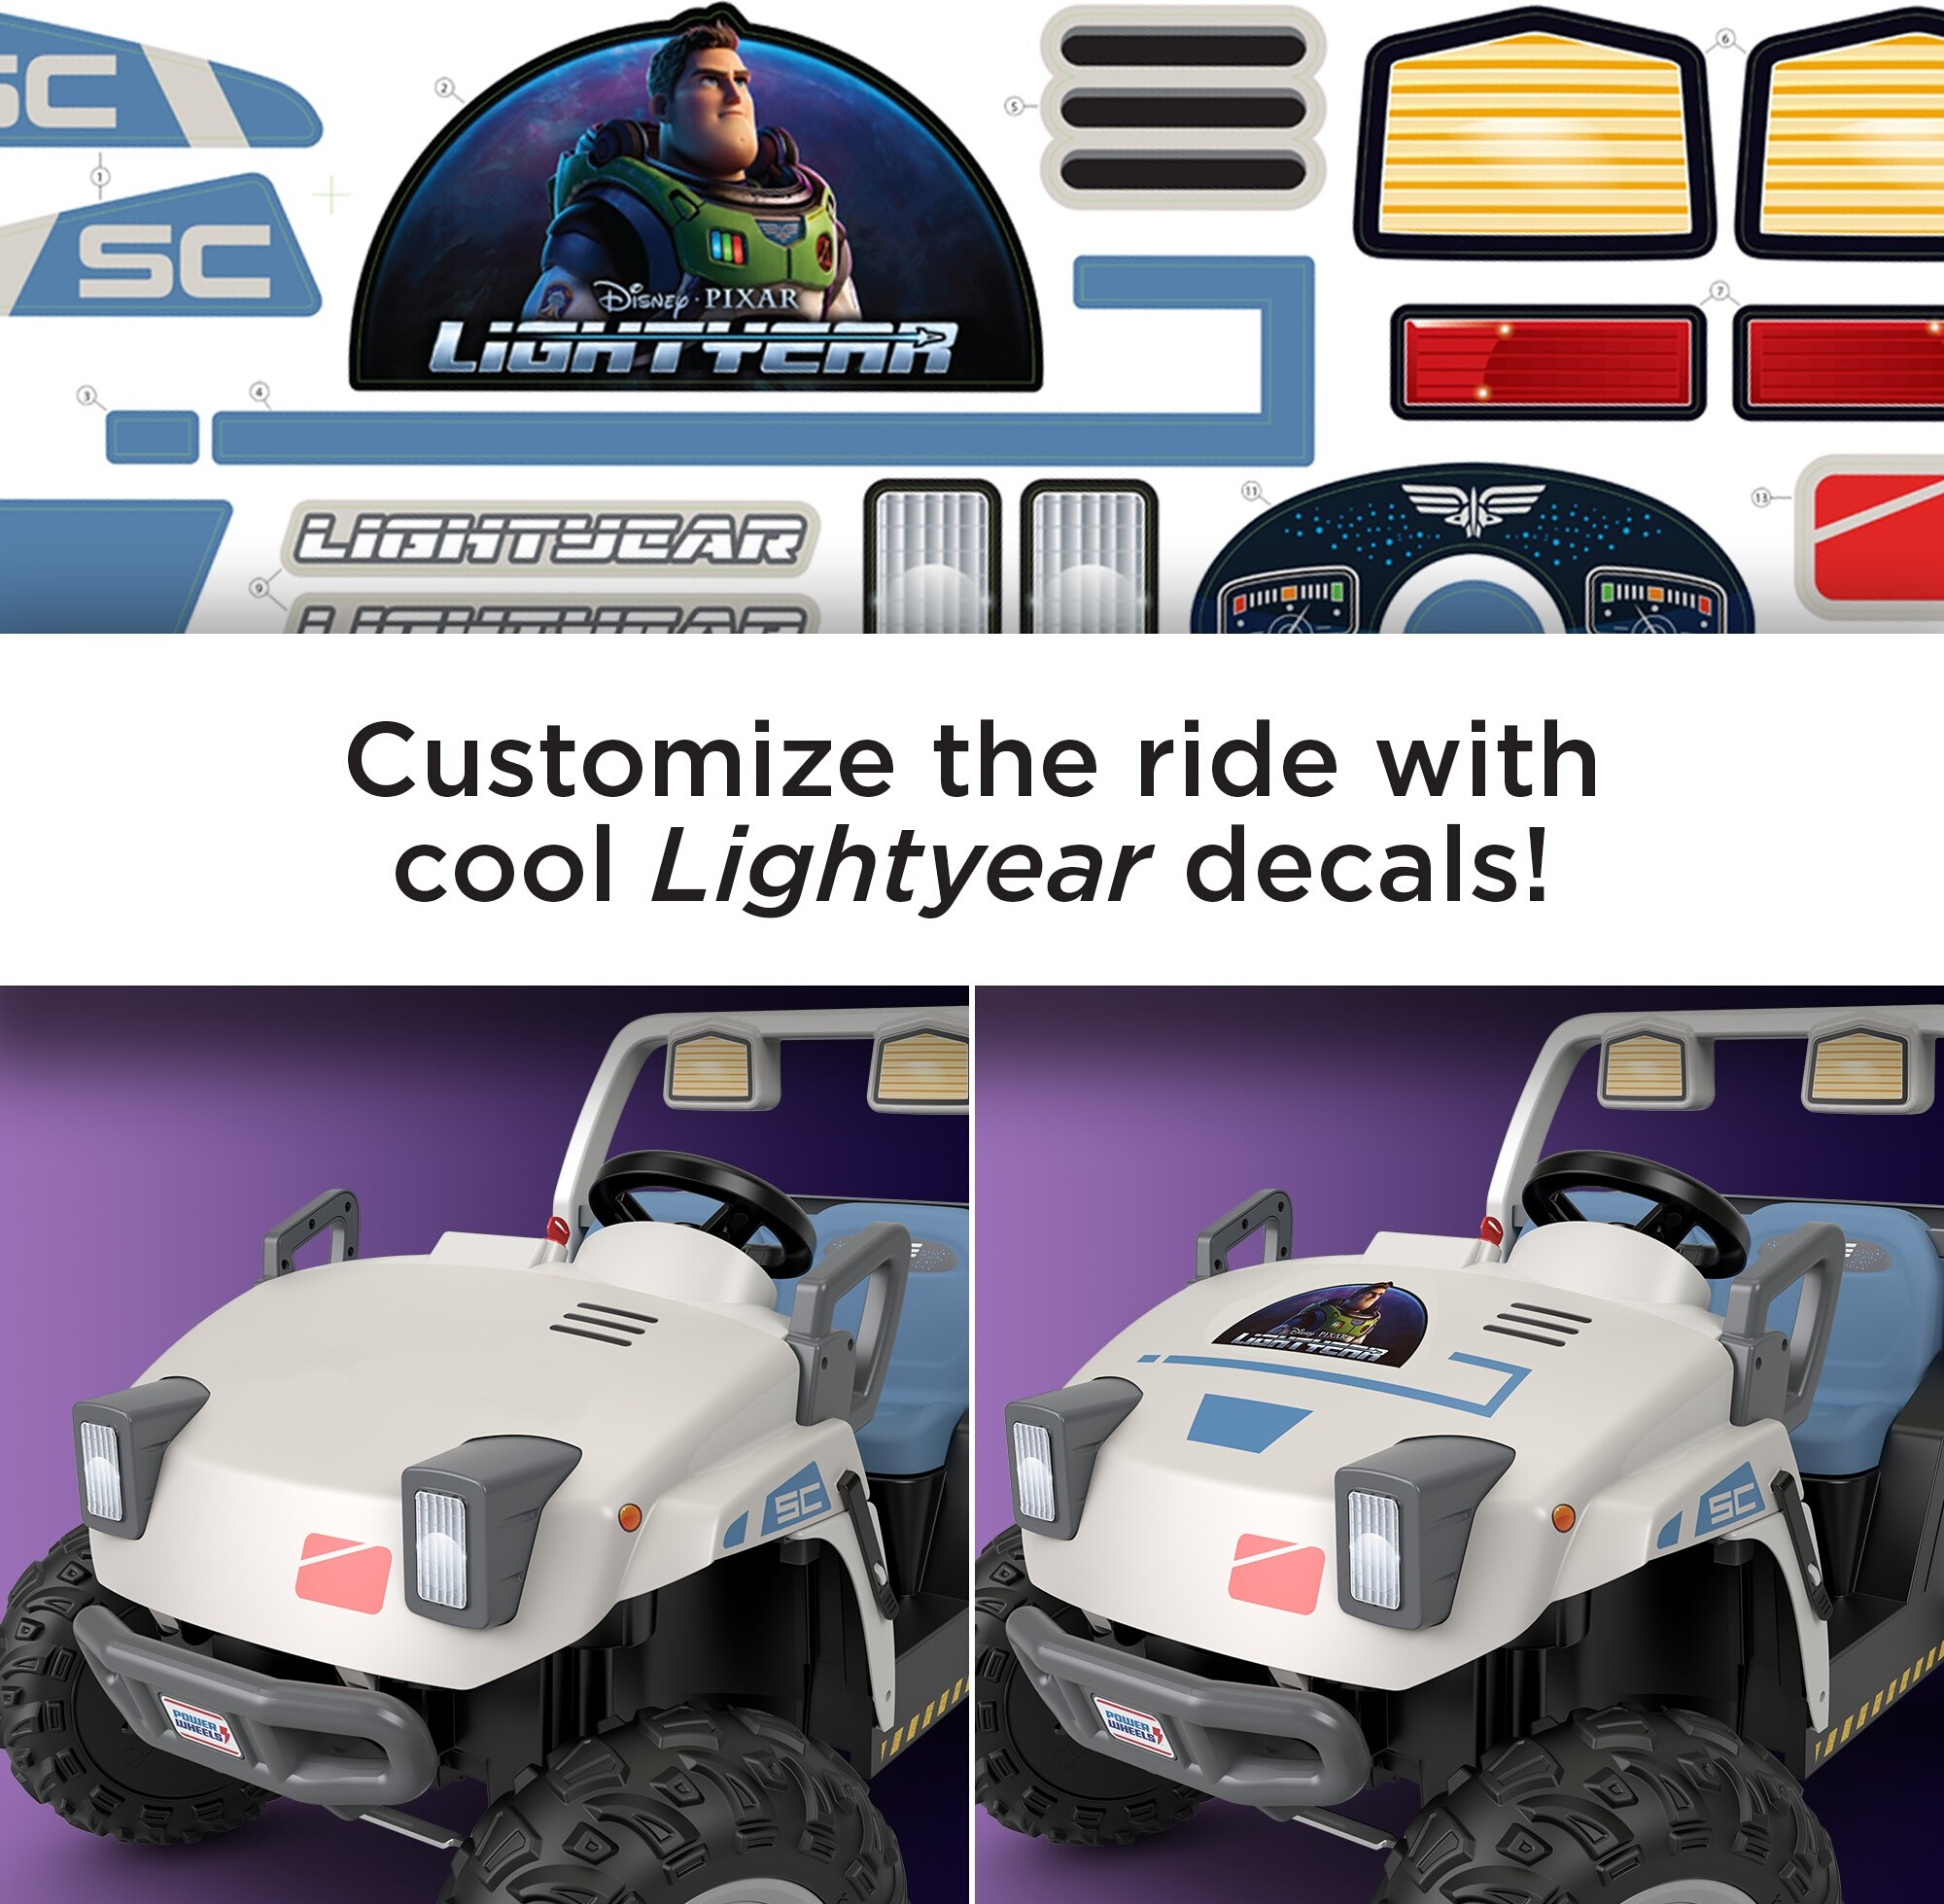 Power Wheels Disney and Pixar Lightyear Star Command Base Transport Ride-on, 12 V, Max Speed: 5 mph - image 4 of 7